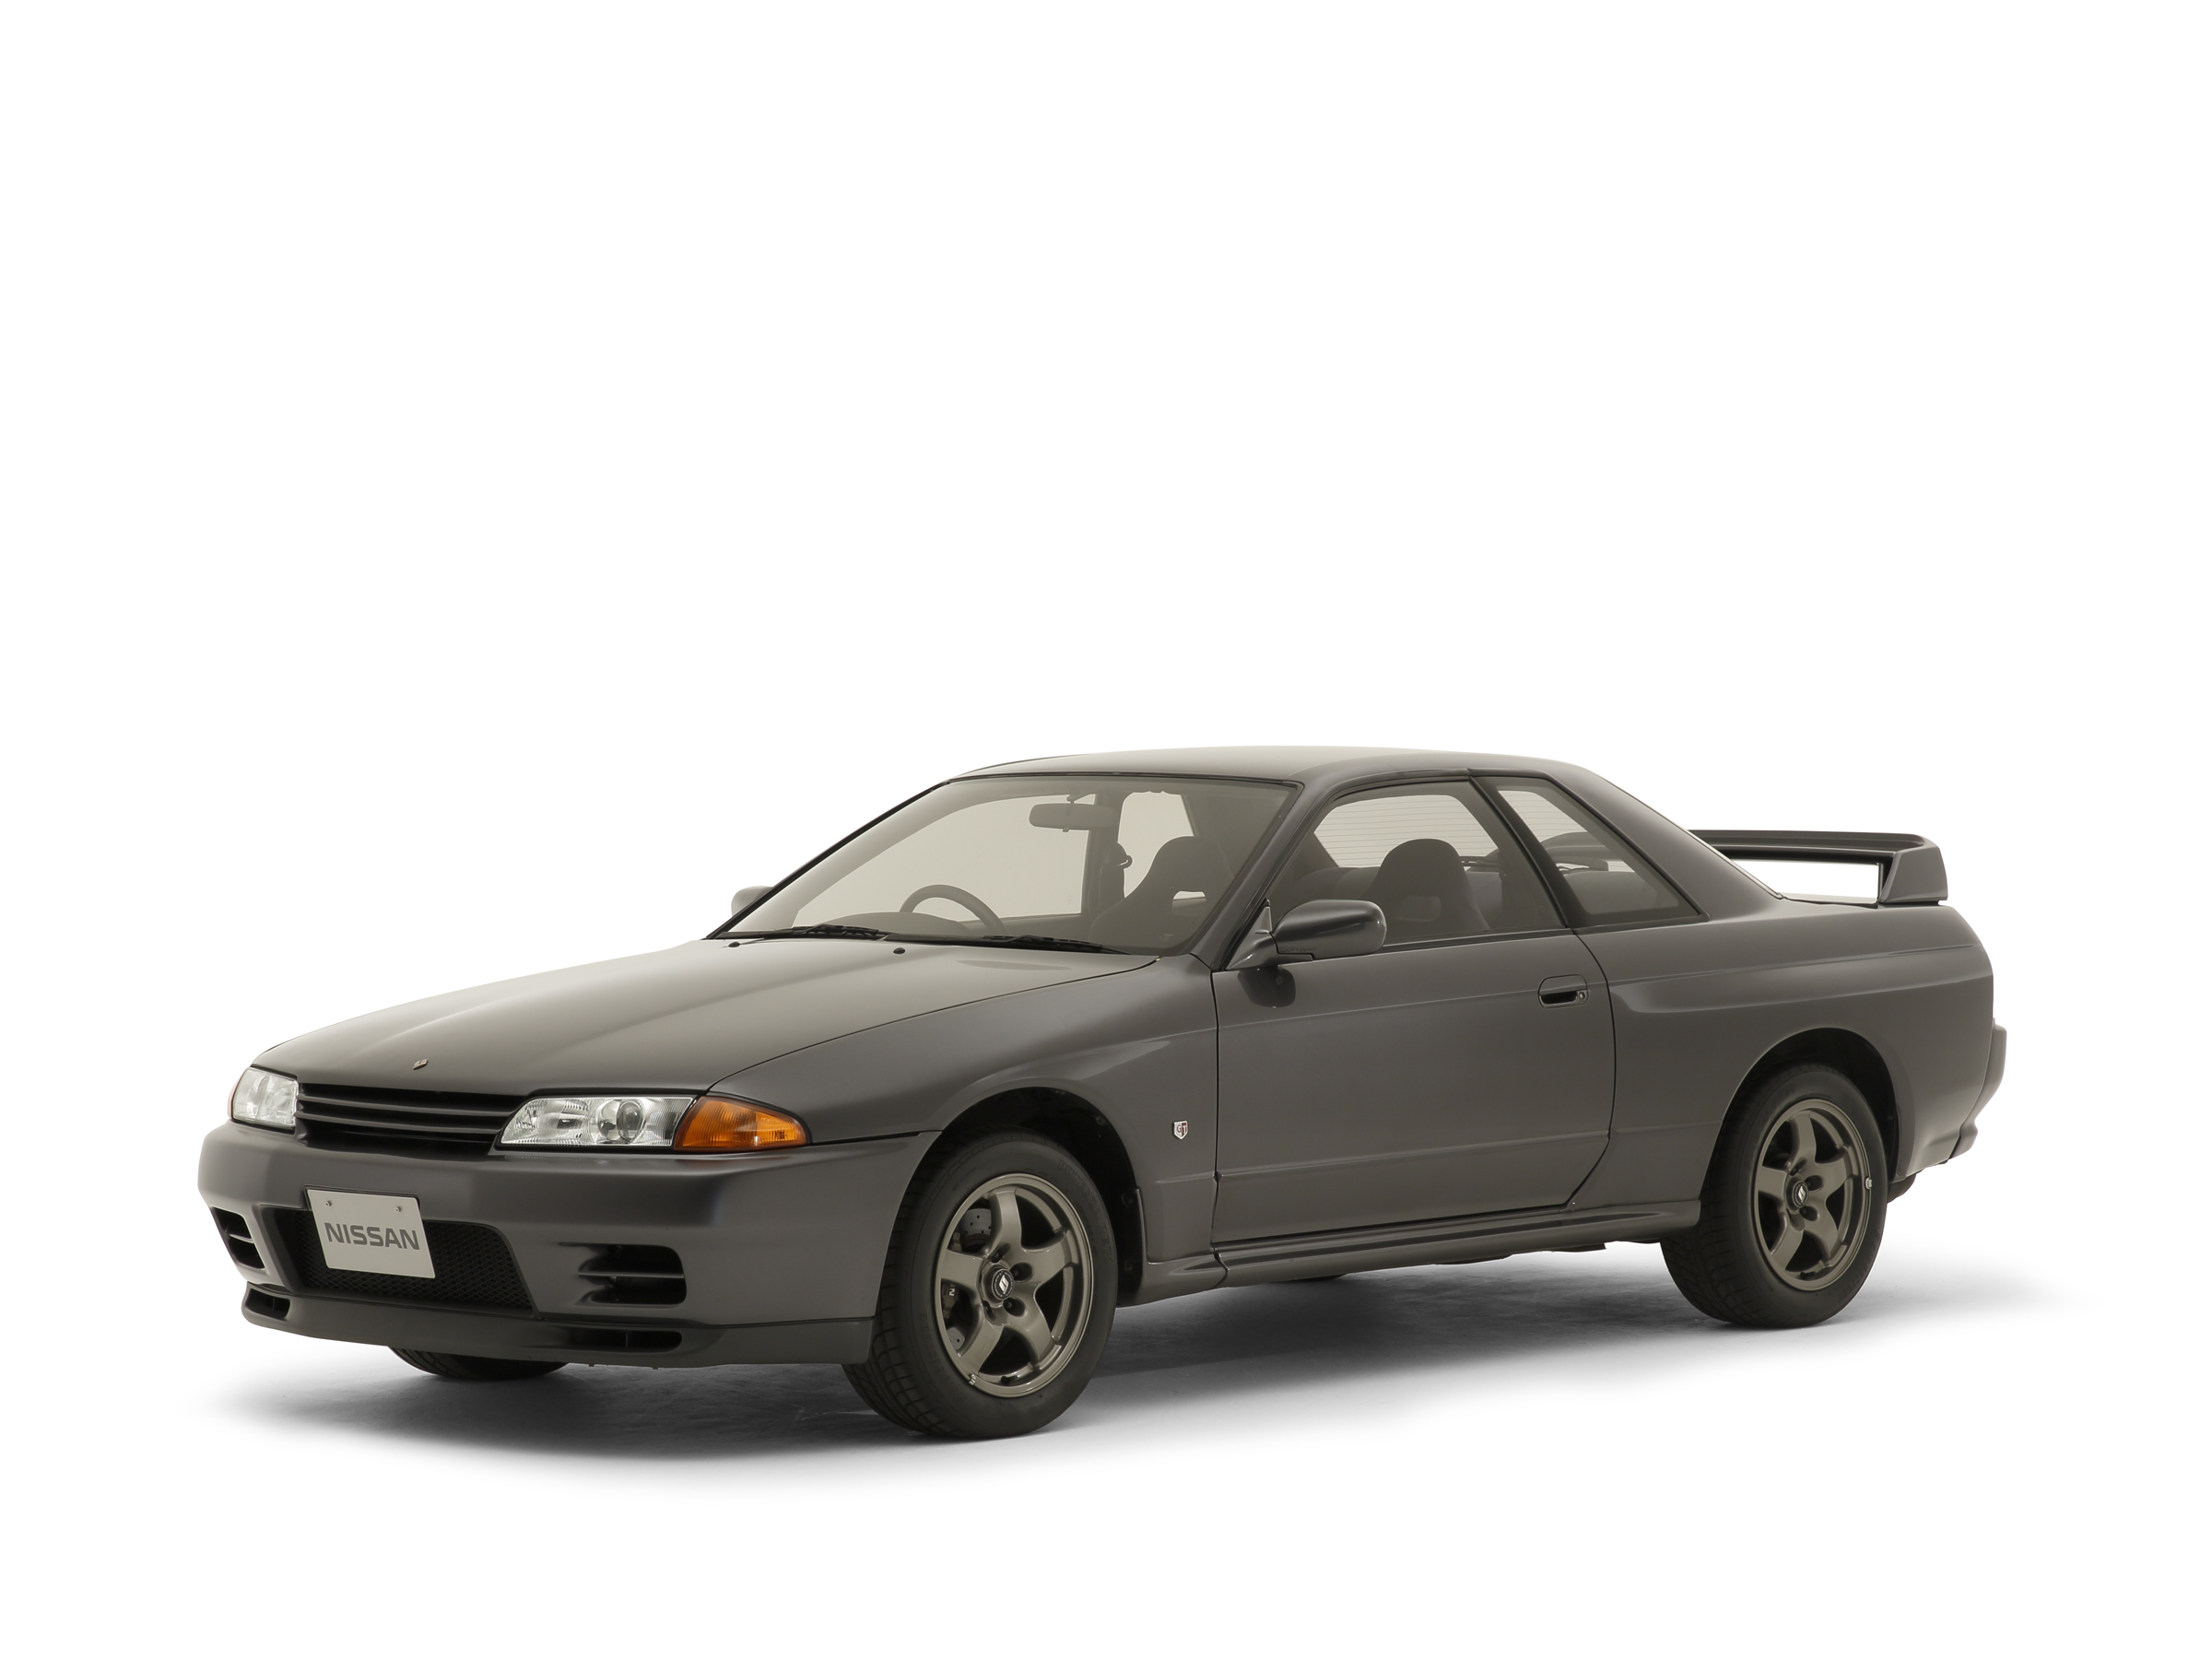 Nissan | Heritage Collection | Skyline GT-R